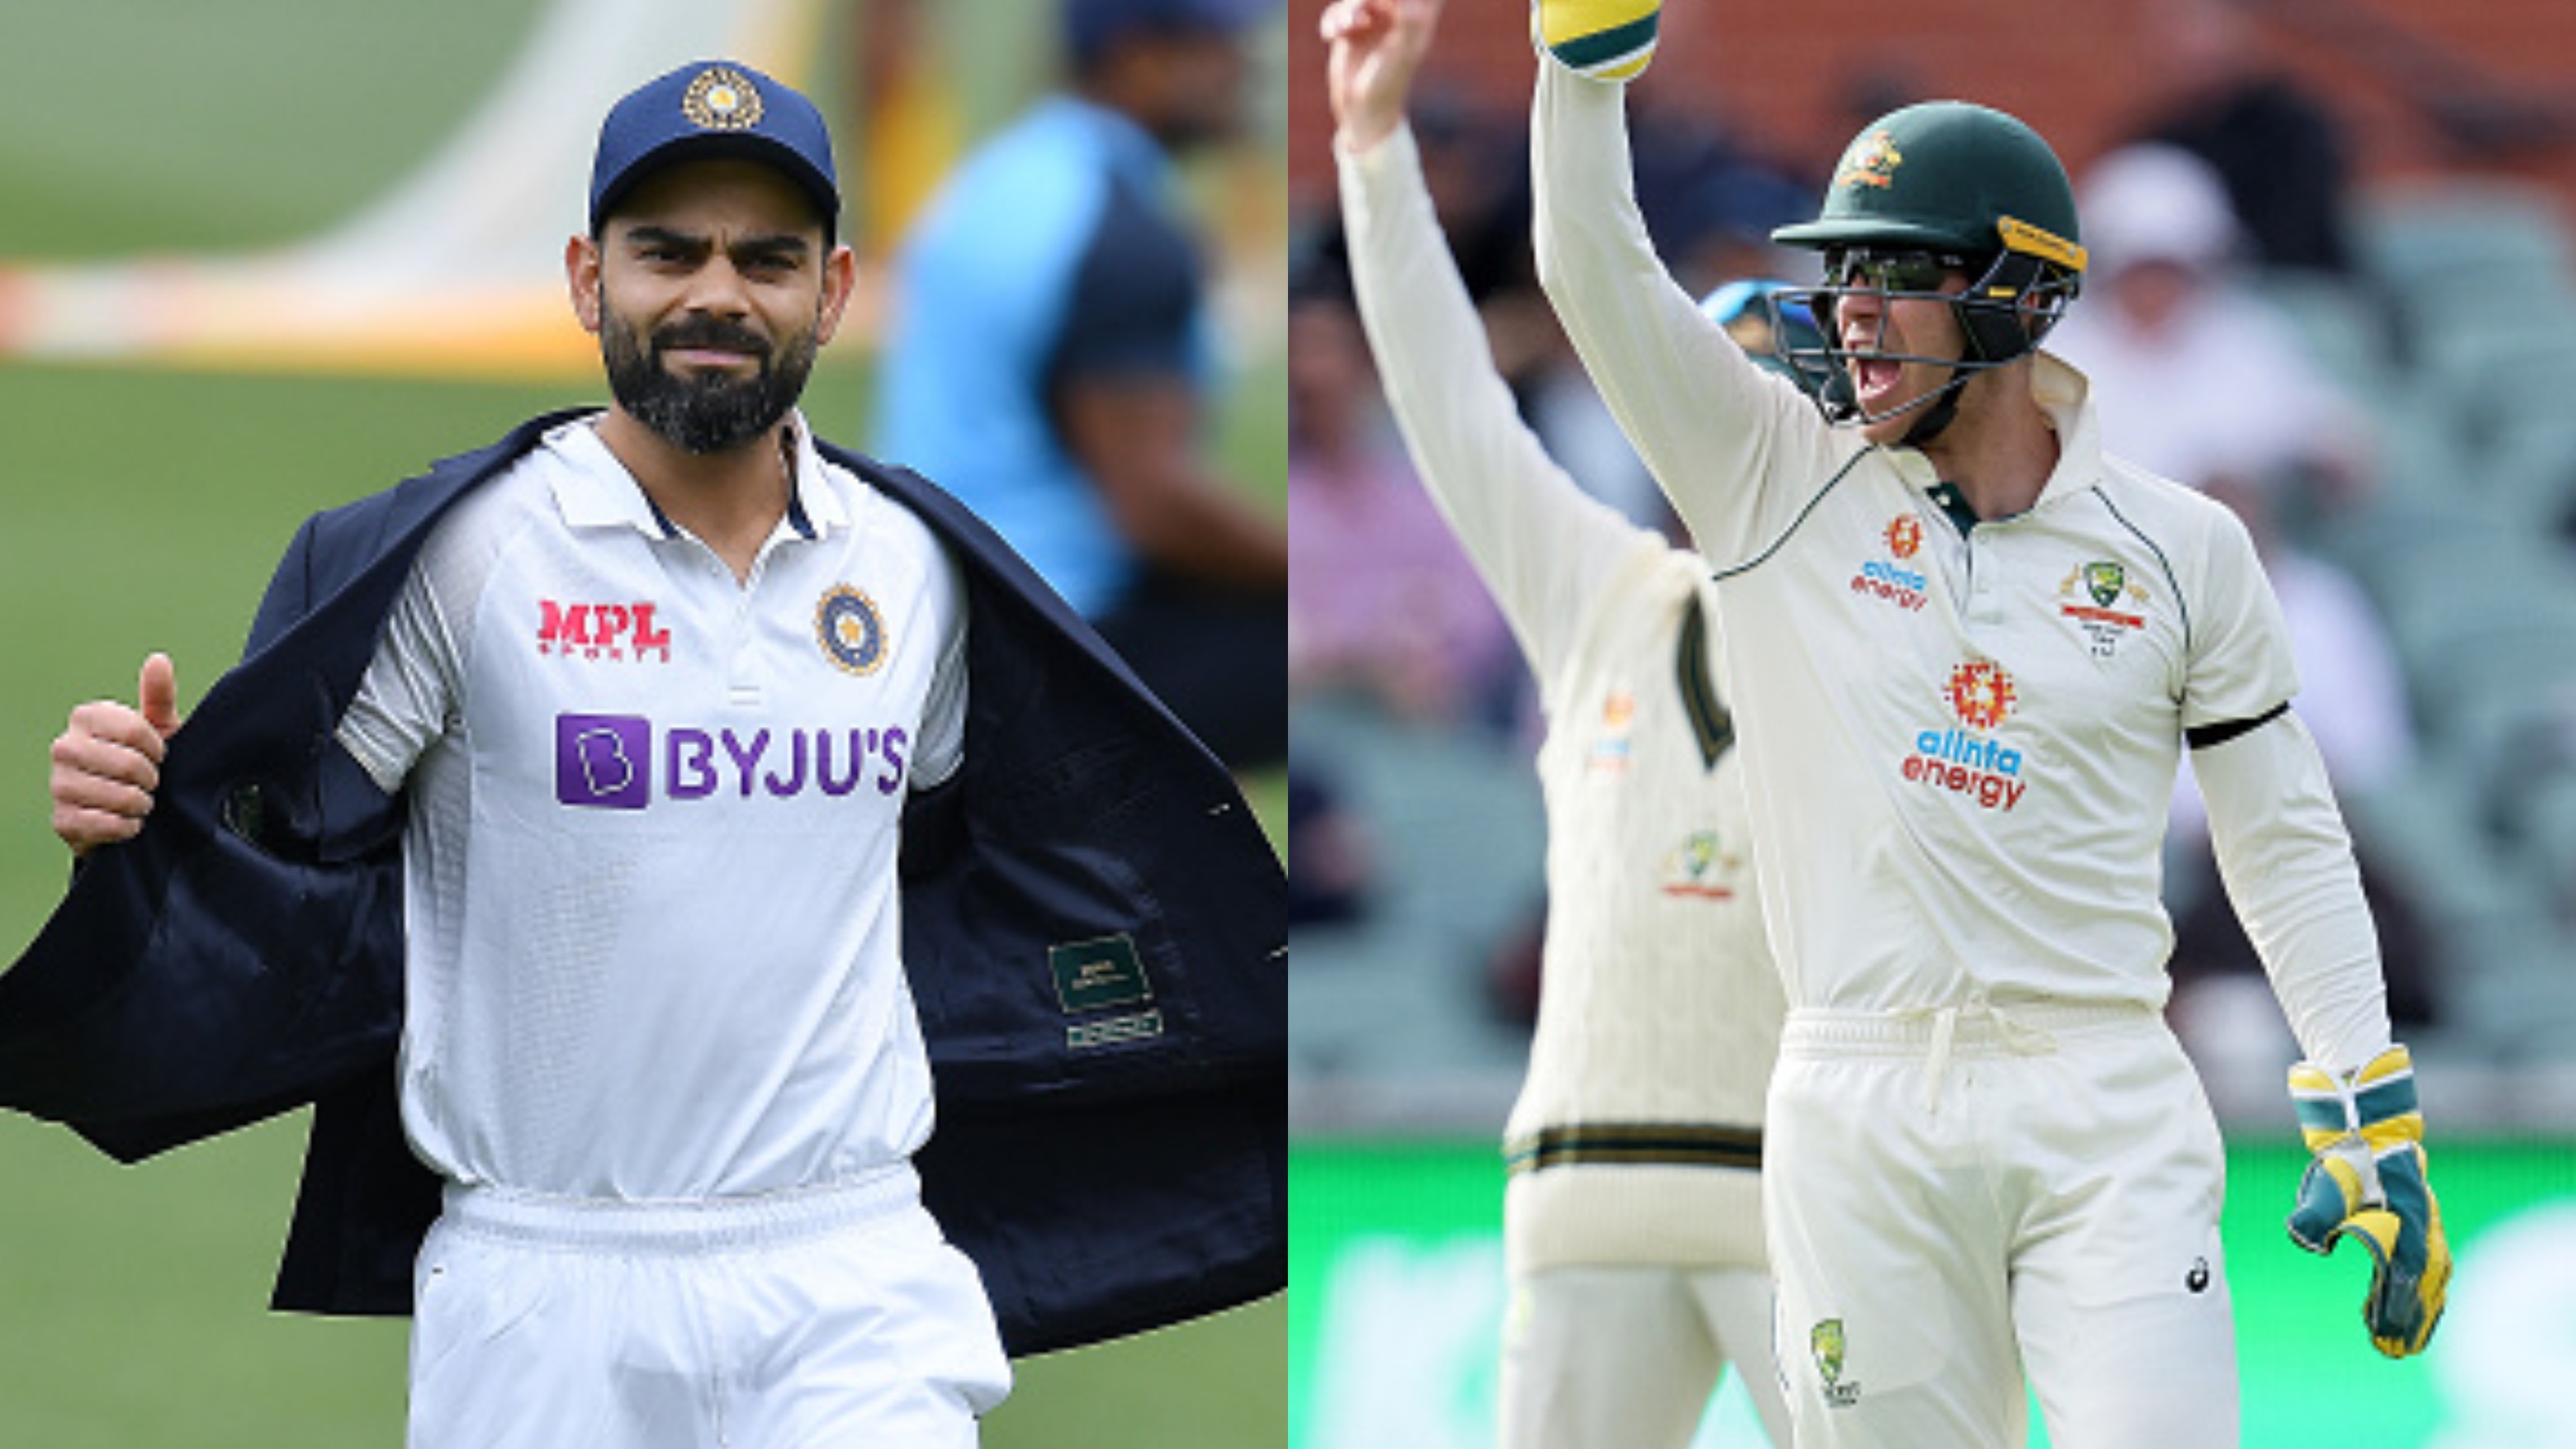 AUS v IND 2020-21: Australia and India Test jerseys feature large sponsor logos in front for 1st time ever